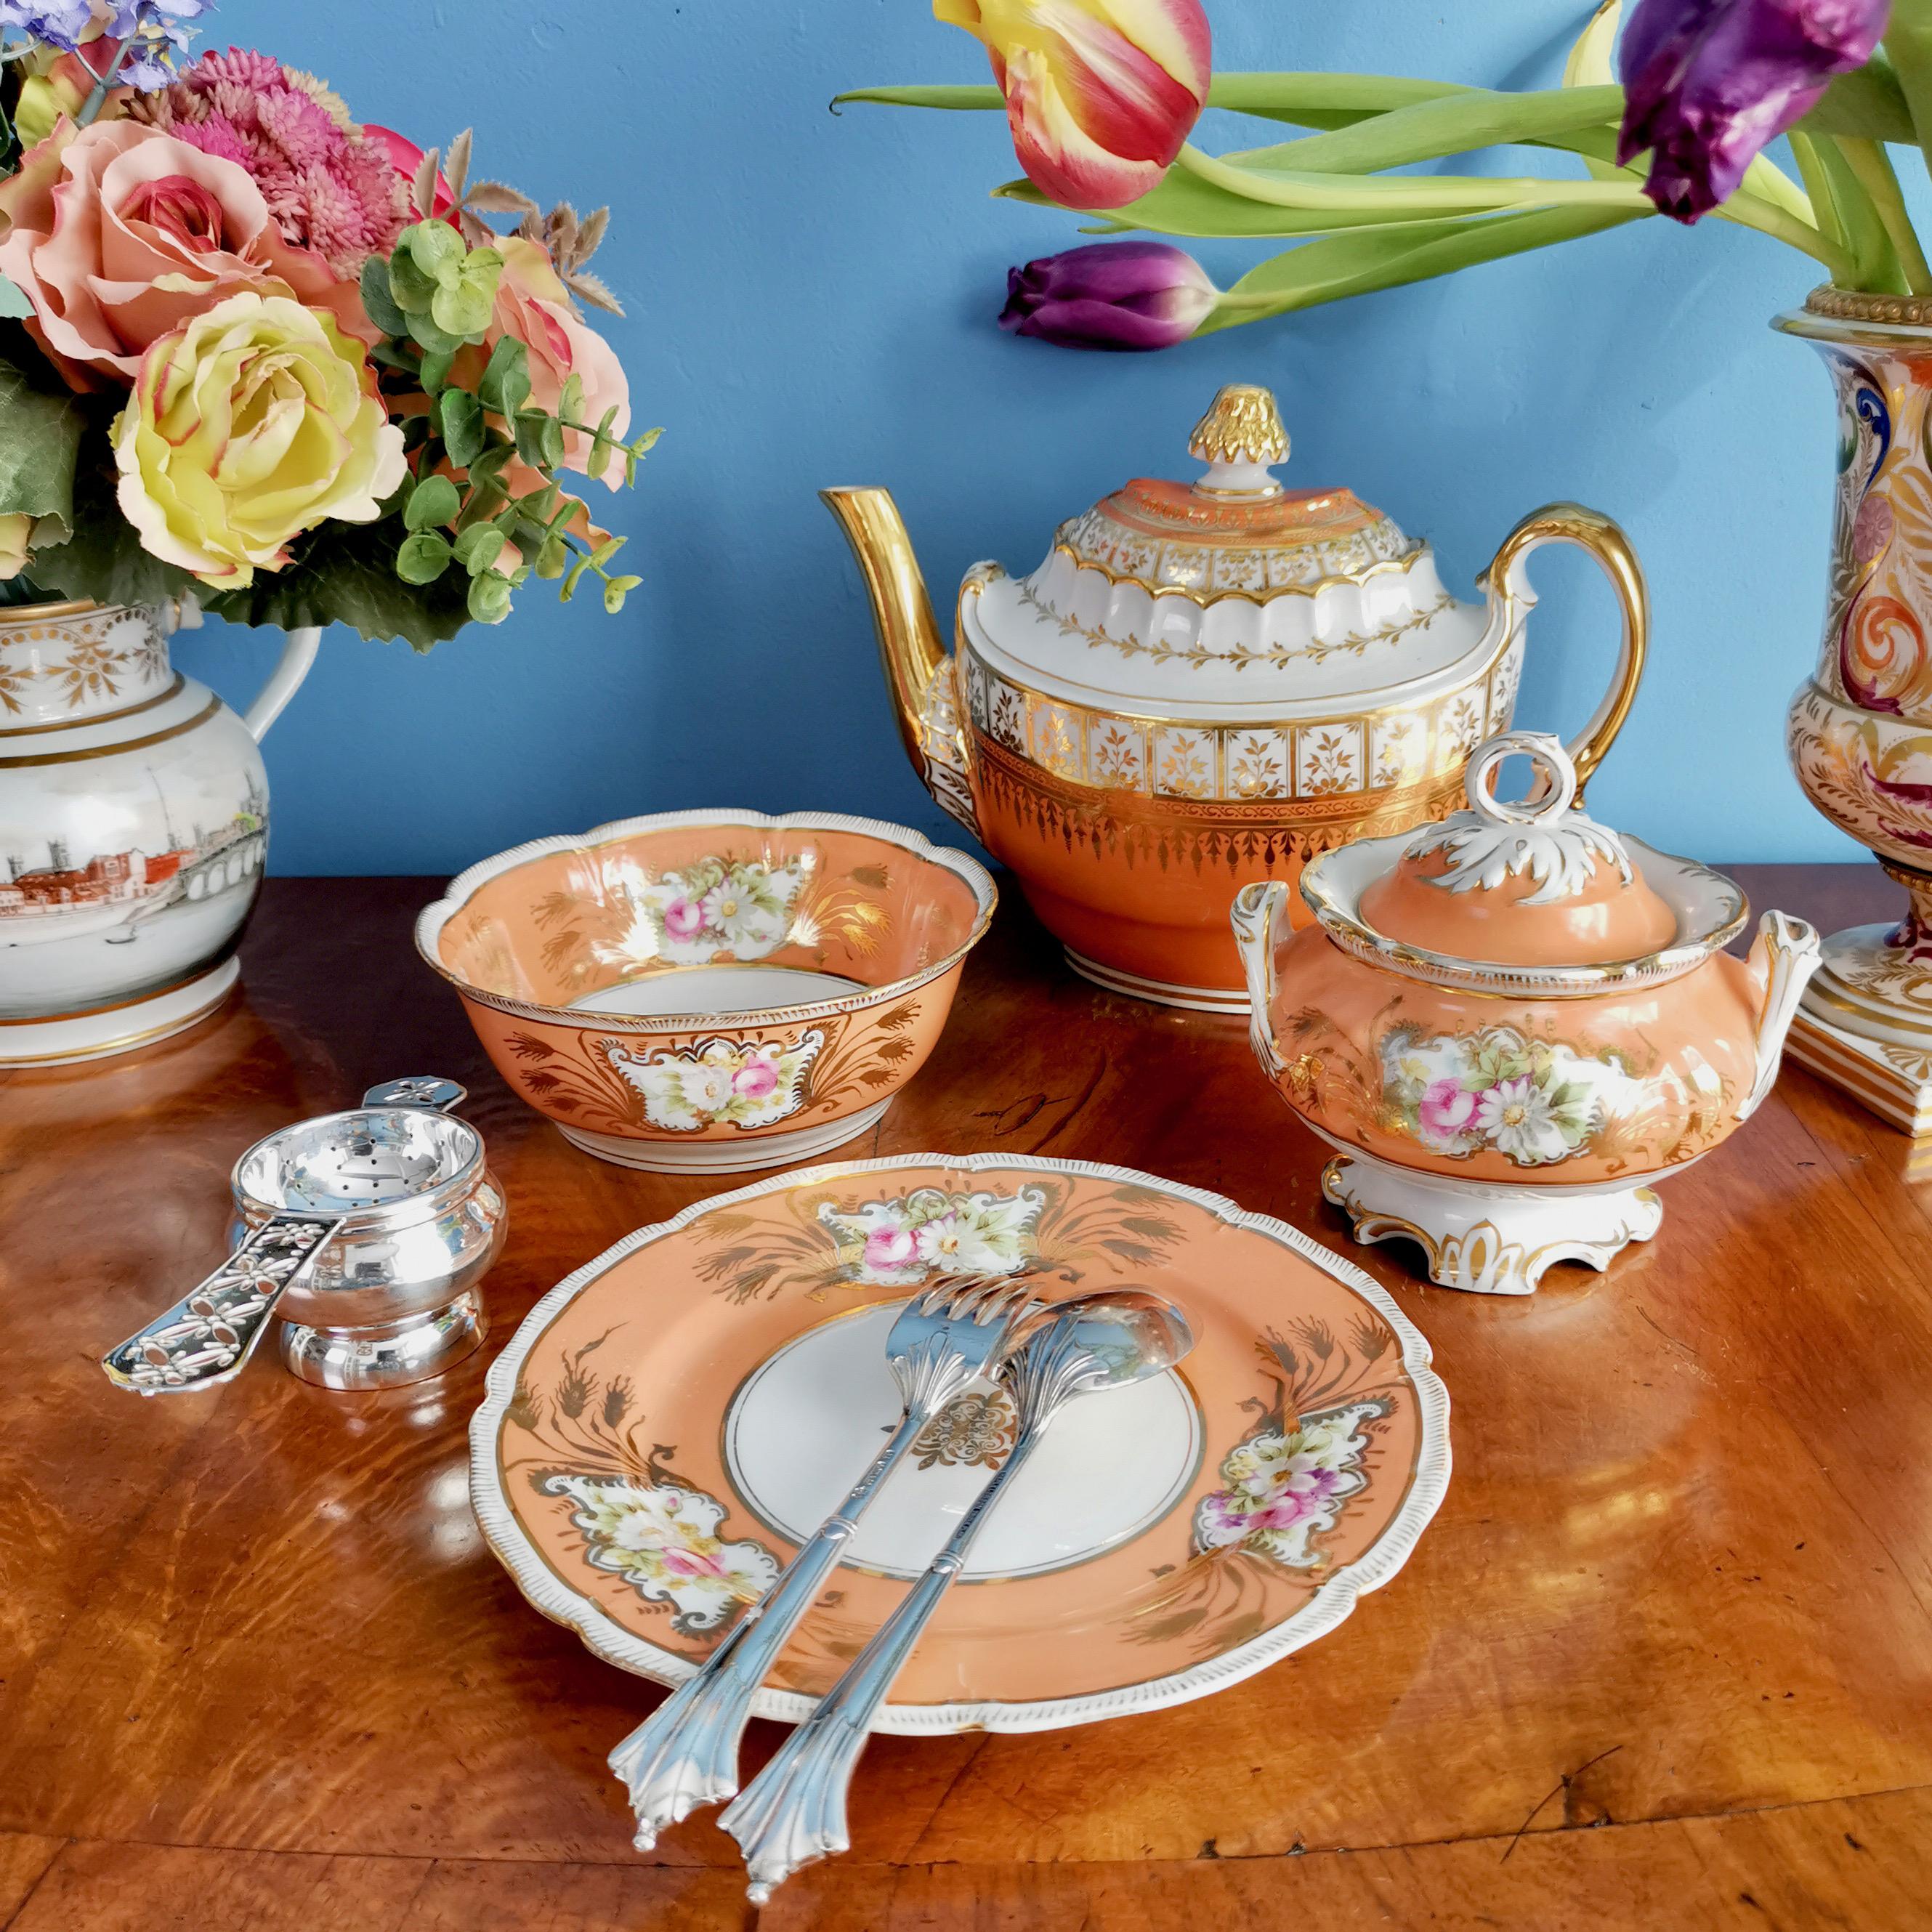 This is a very charming set of a sucrier or lidded sugar box, a bowl and a plate, made in Germany in about 1860. The set is made in the Rococo Revival style. It has a beautiful warm orange ground with flowers and 